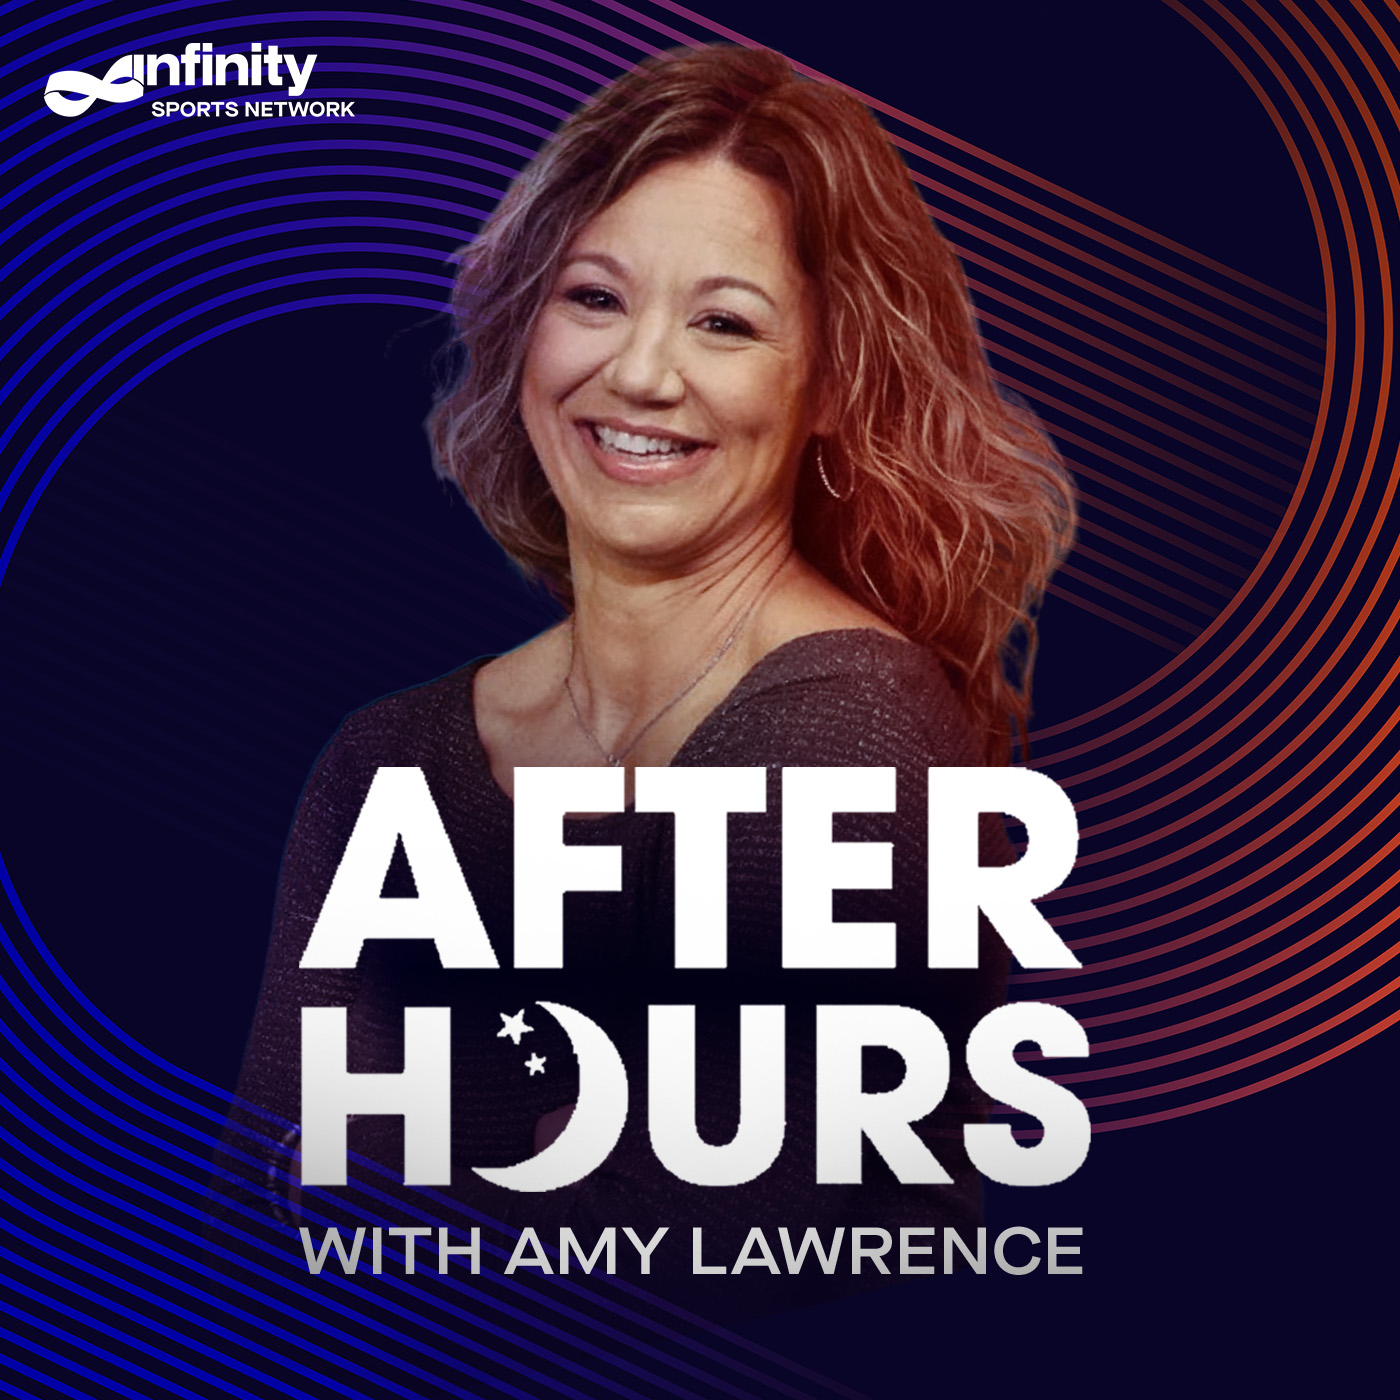 4/23/21 After Hours with Amy Lawrence PODCAST: Hour 3